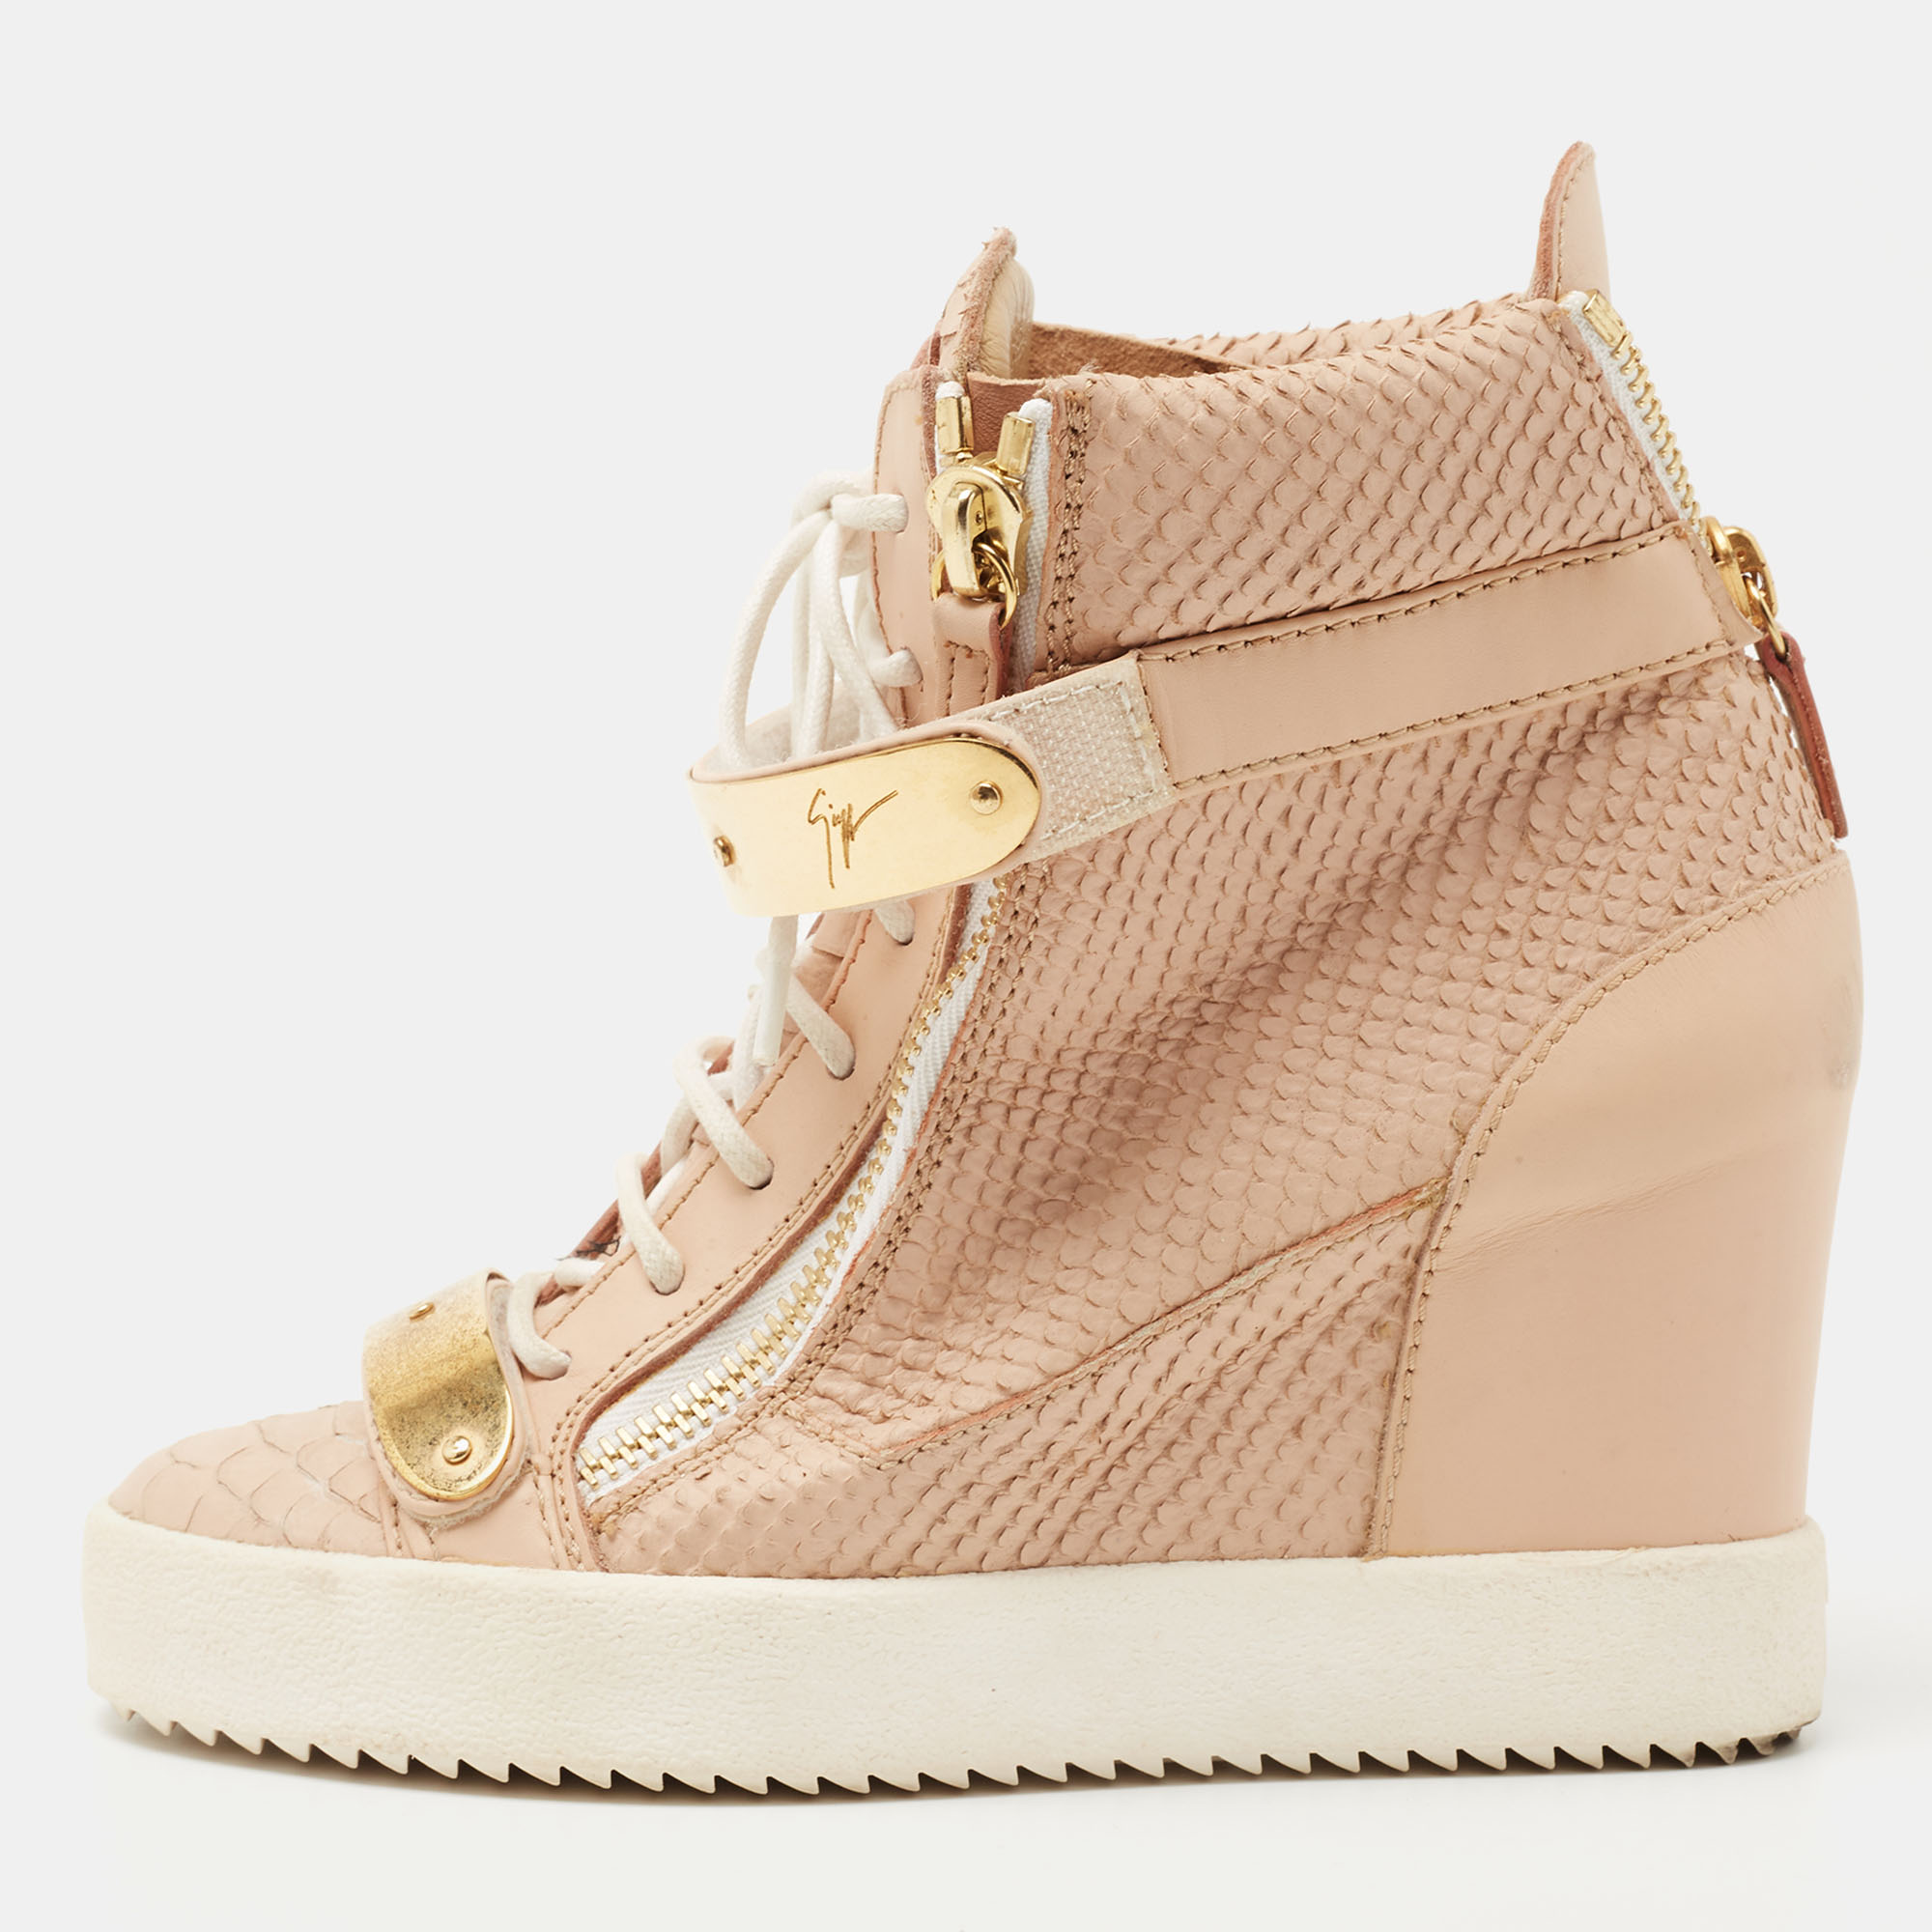 Giuseppe zanotti peach pink python embossed leather coby wedge sneakers size 38